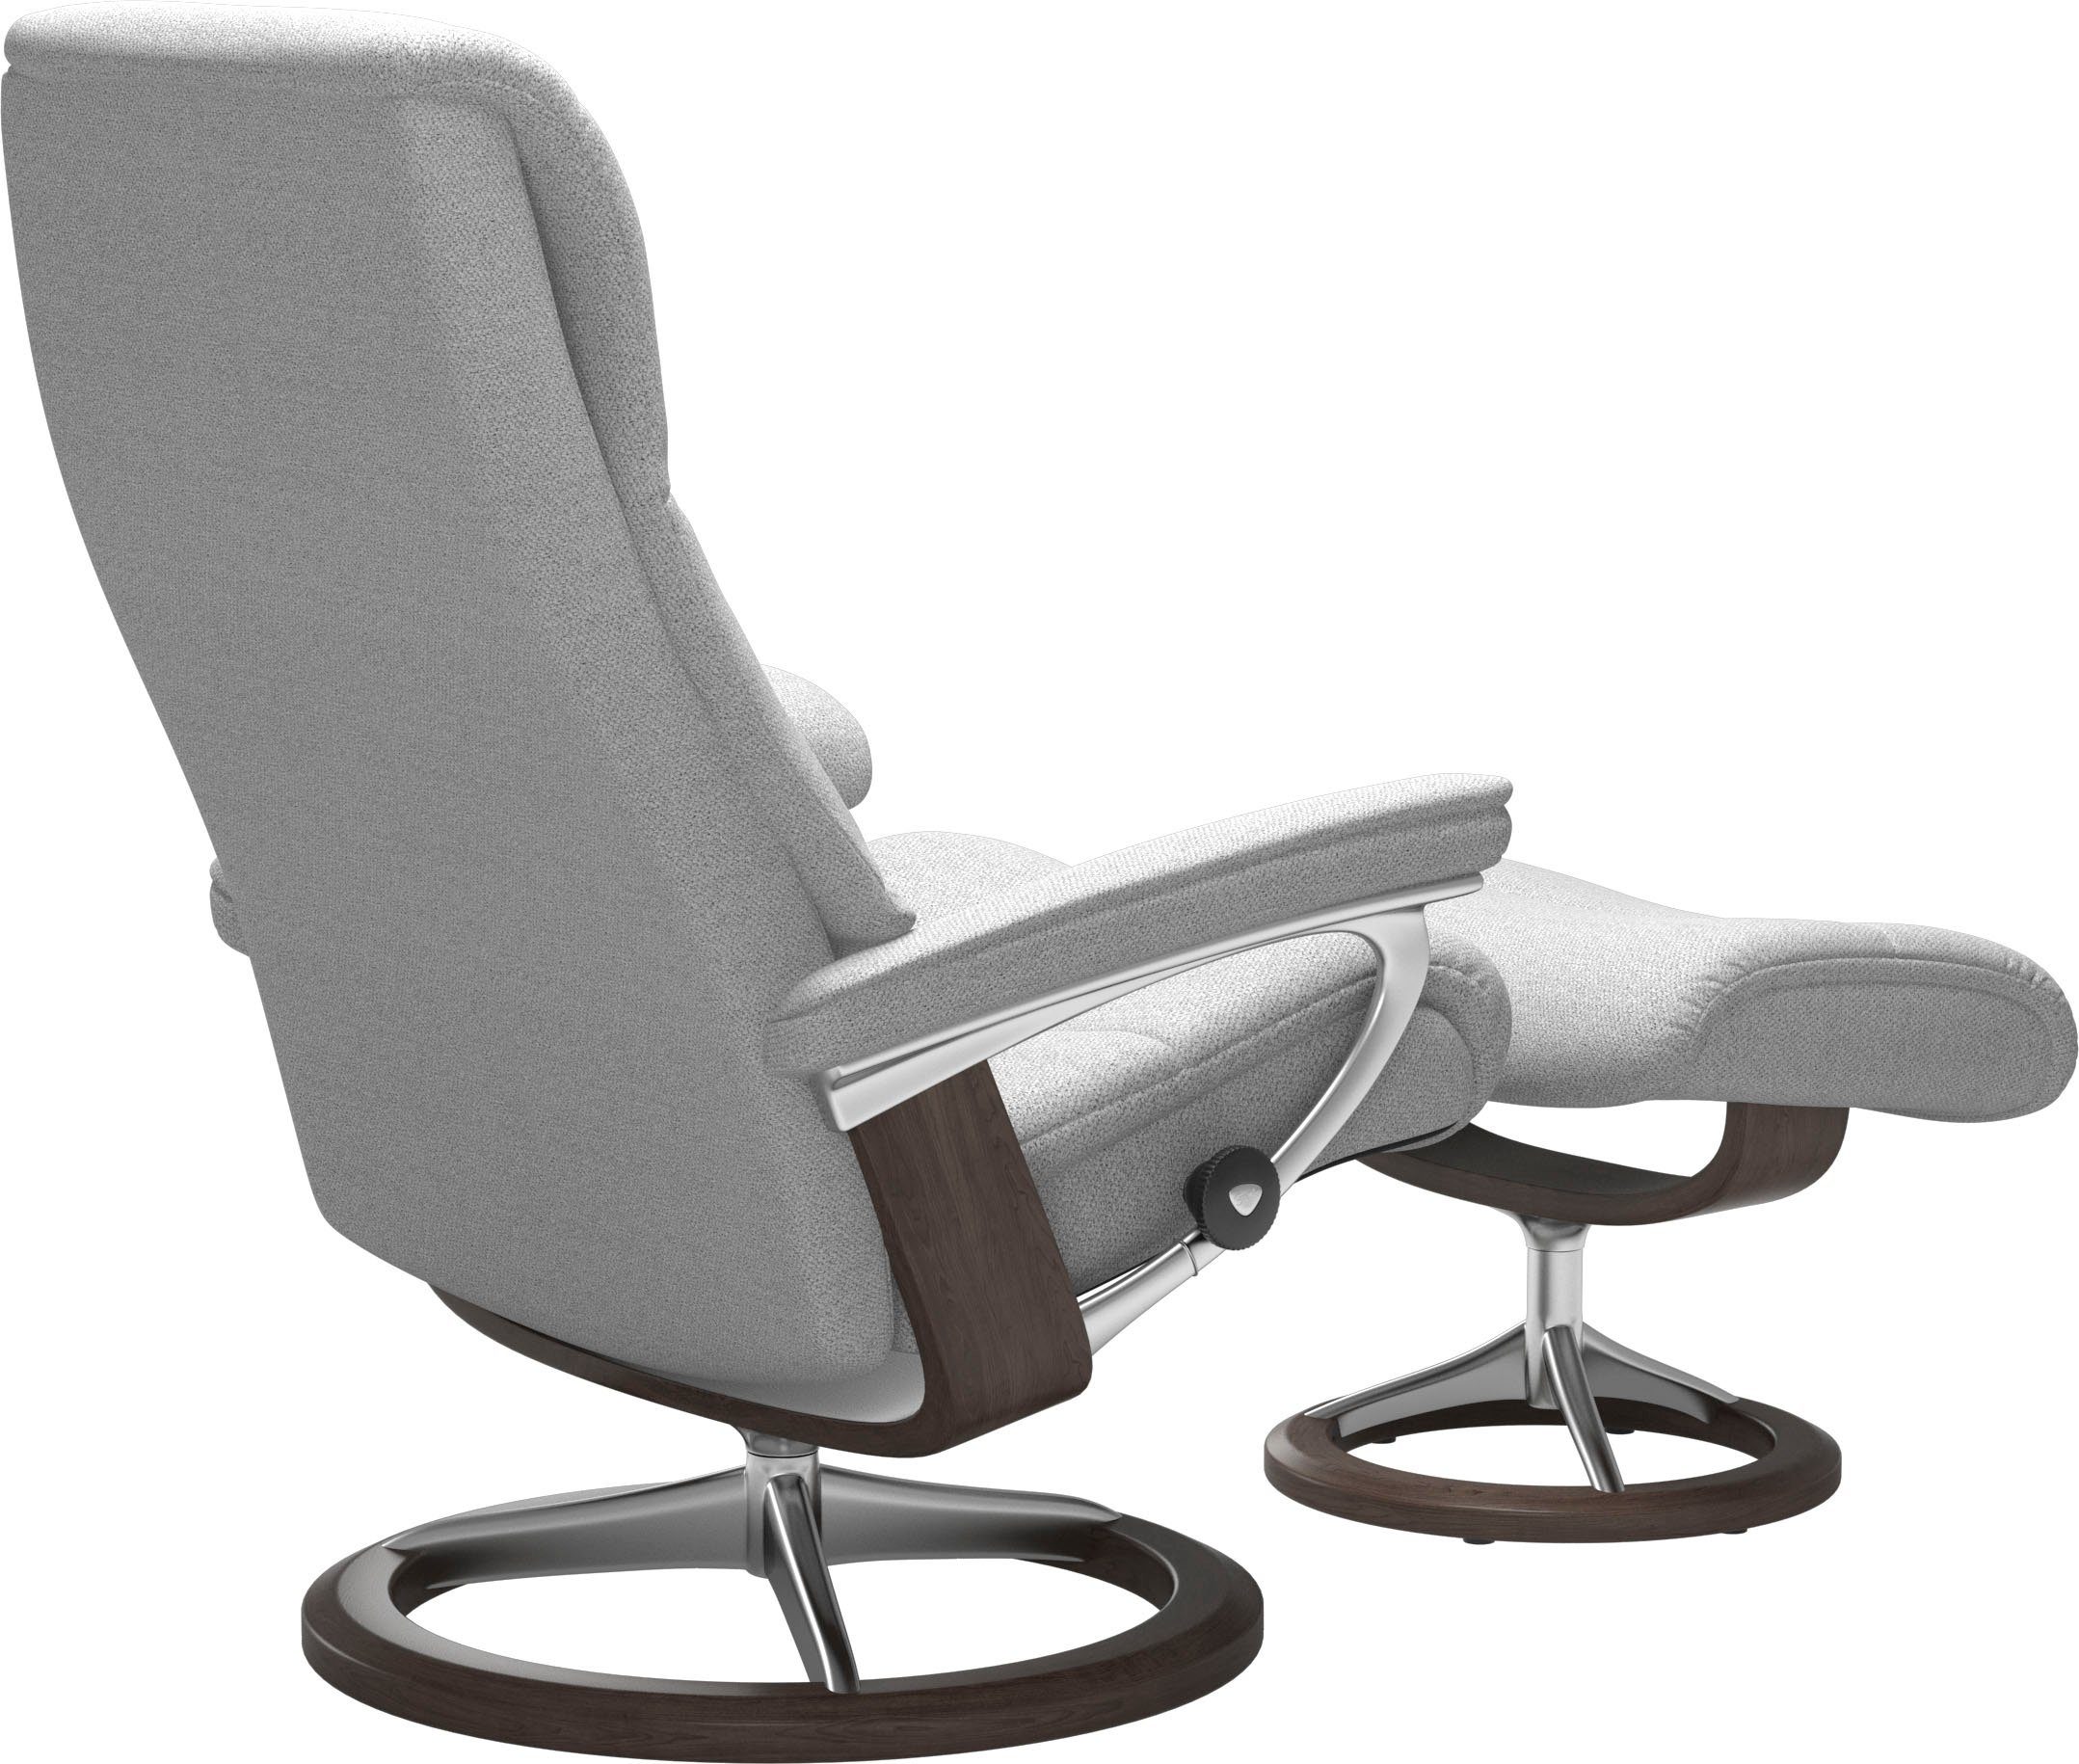 Stressless® Relaxsessel S,Gestell mit Größe Wenge View, Signature Base